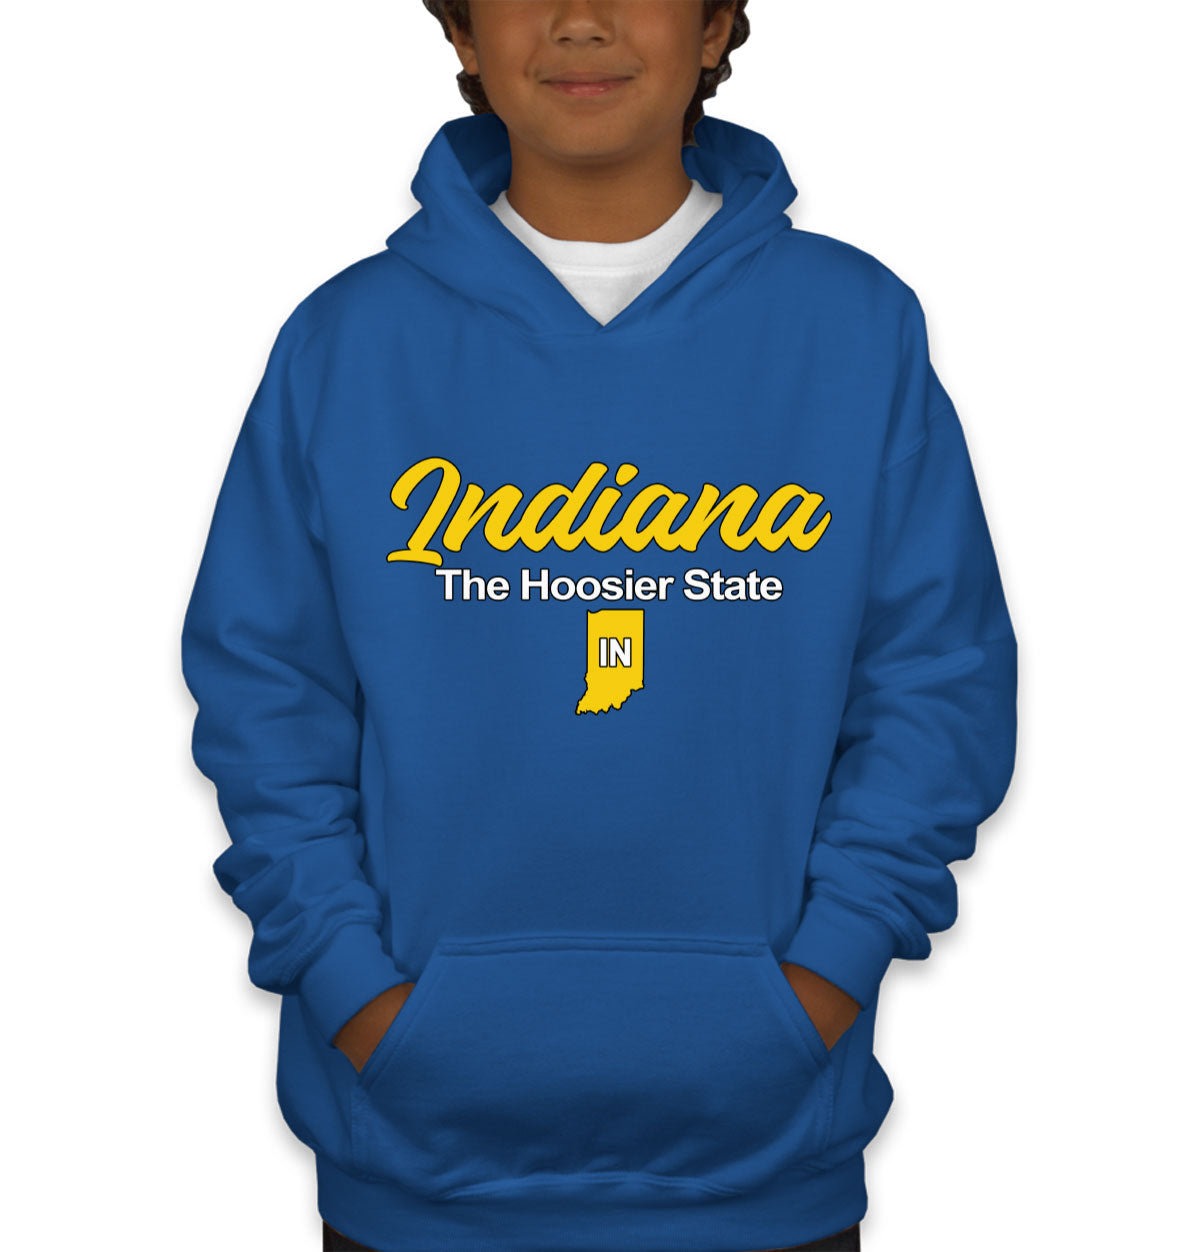 Indiana The Hoosier State Youth Hoodie